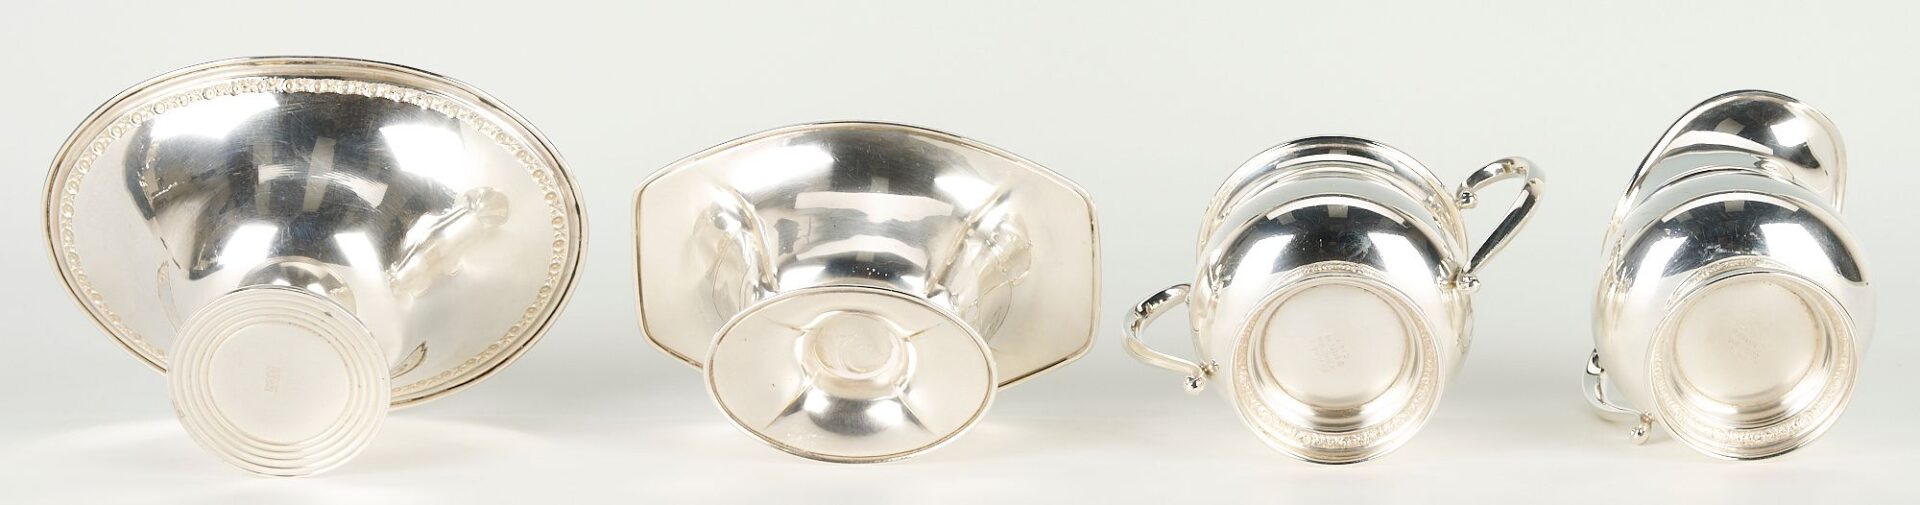 Lot 1056: 15 Assorted Sterling Silver Table Items